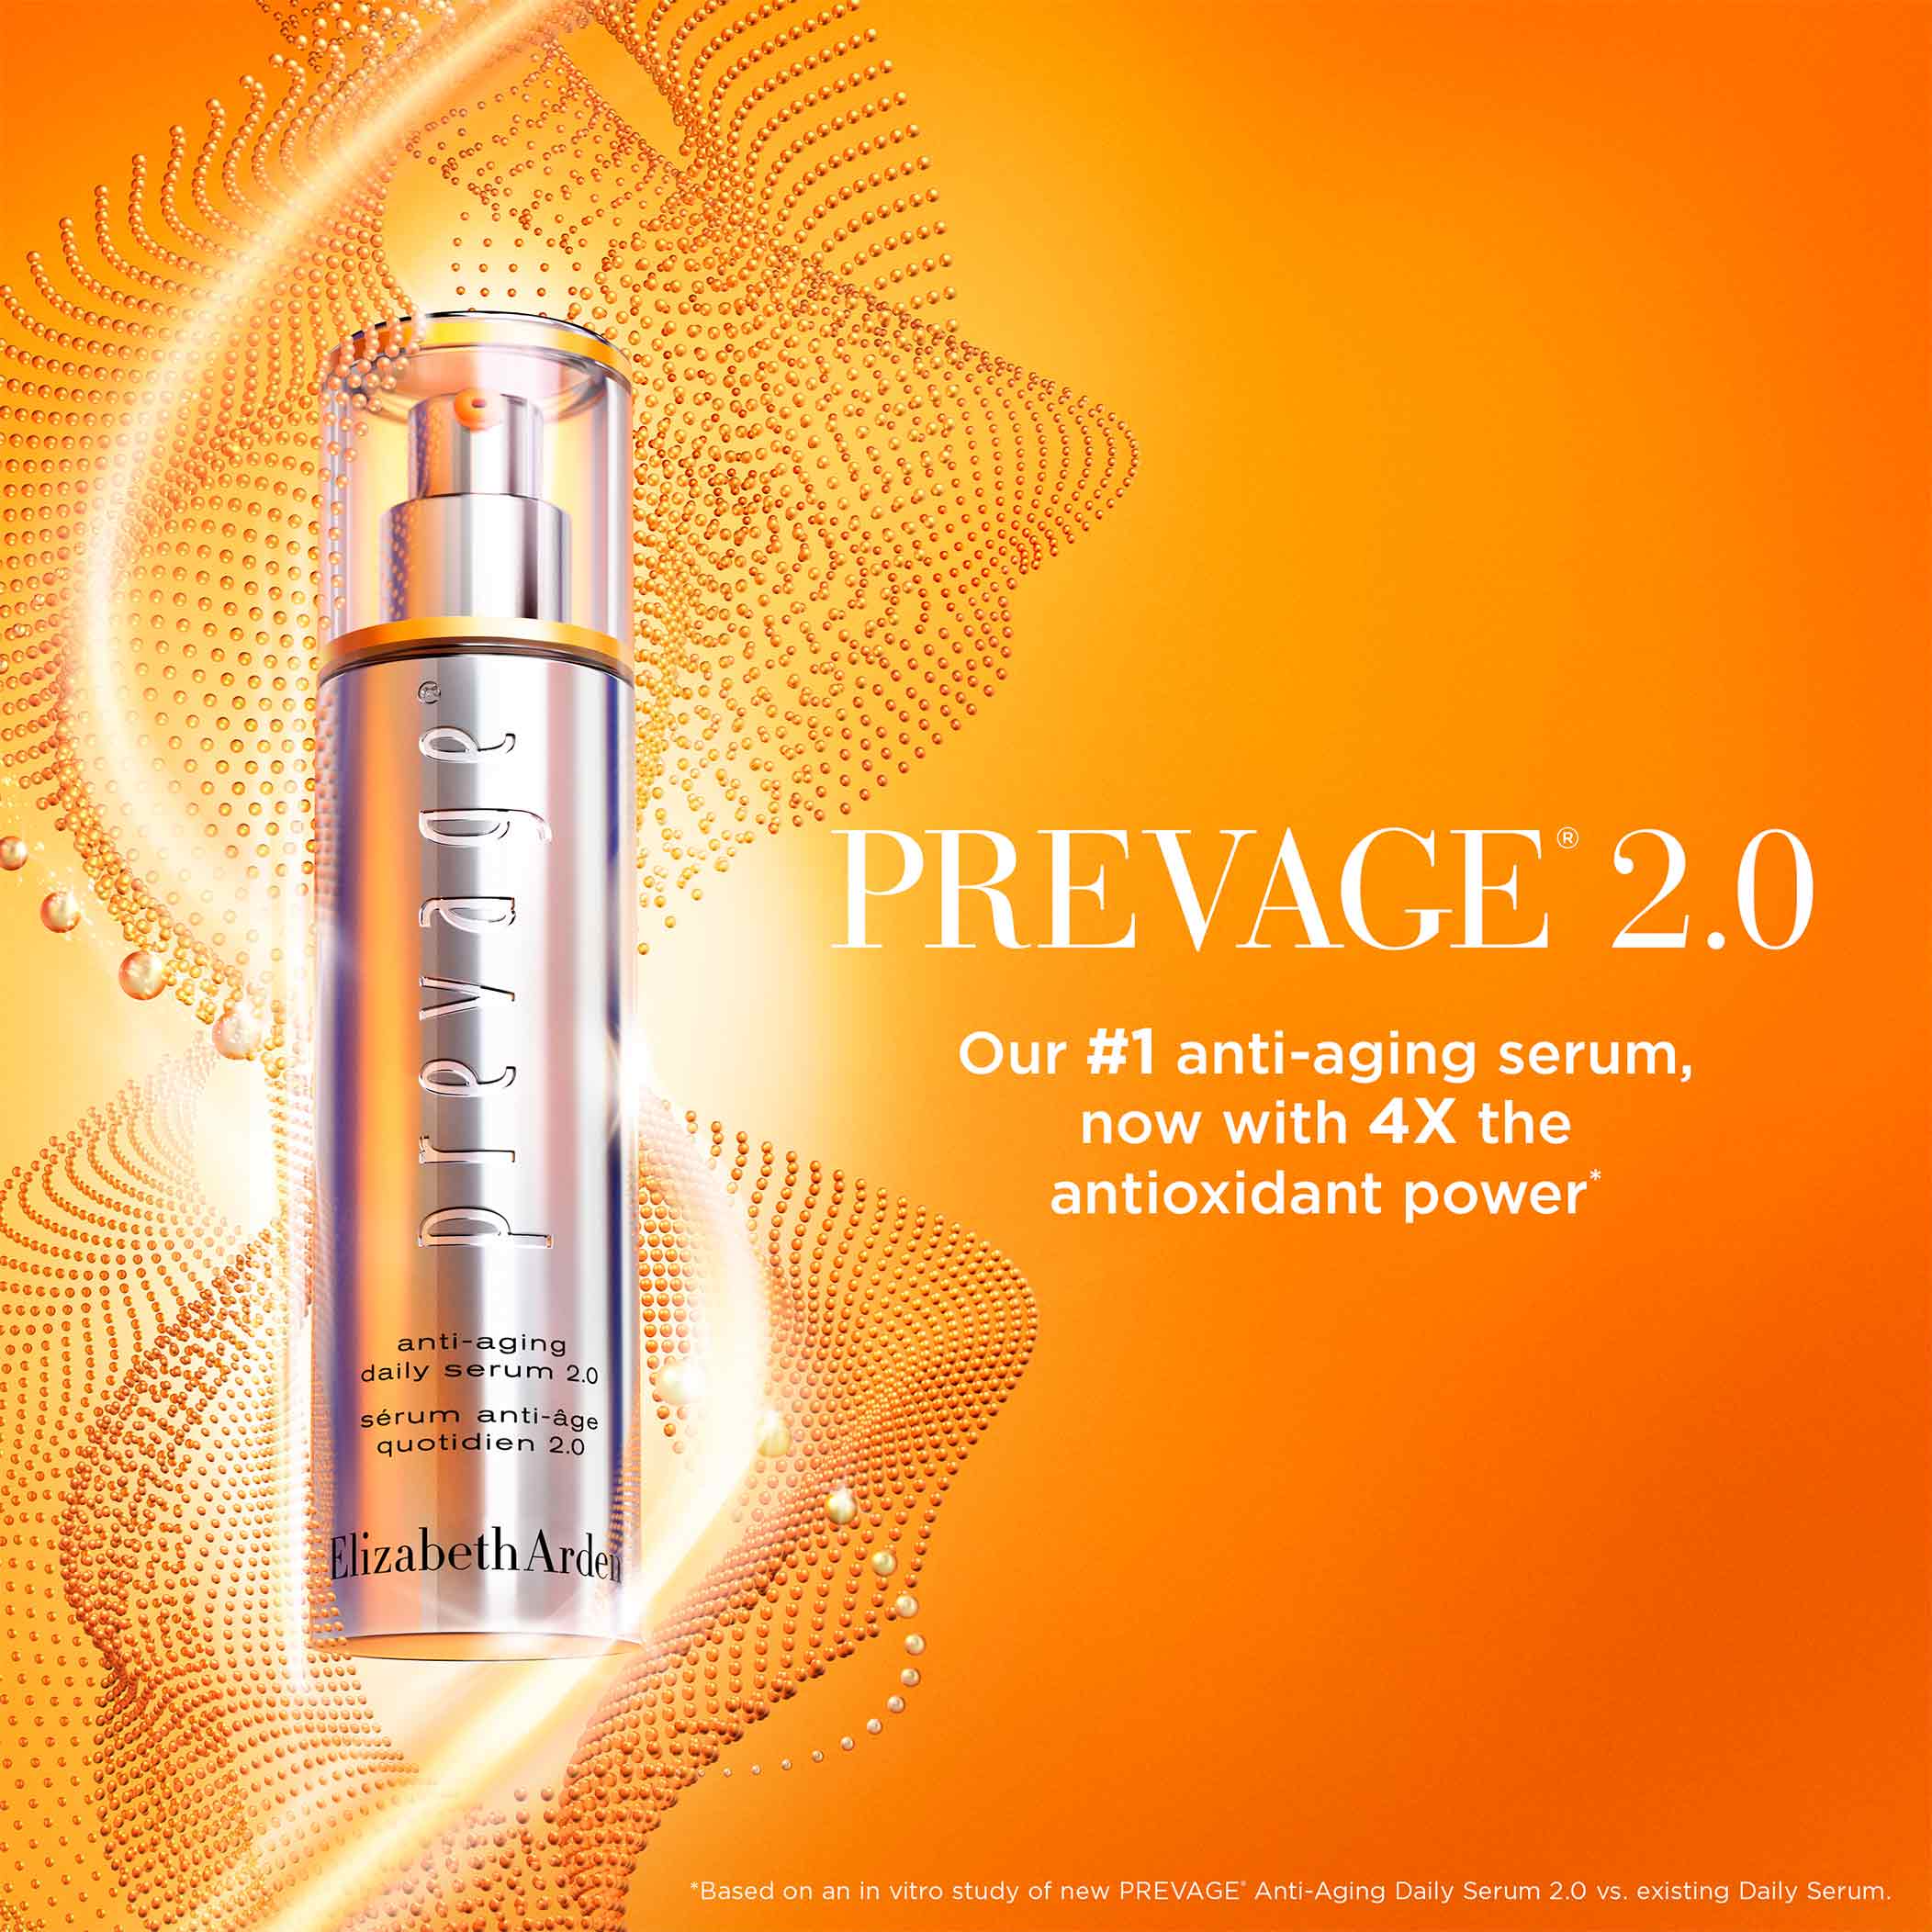 Prevage 2.0- Our #1 anti-aging serum, now with 4X the antioxidant power* *Based on an in vitro study of new PREVAGE Anti-Aging Daily Serum 2.0 vs existing Daily Serum